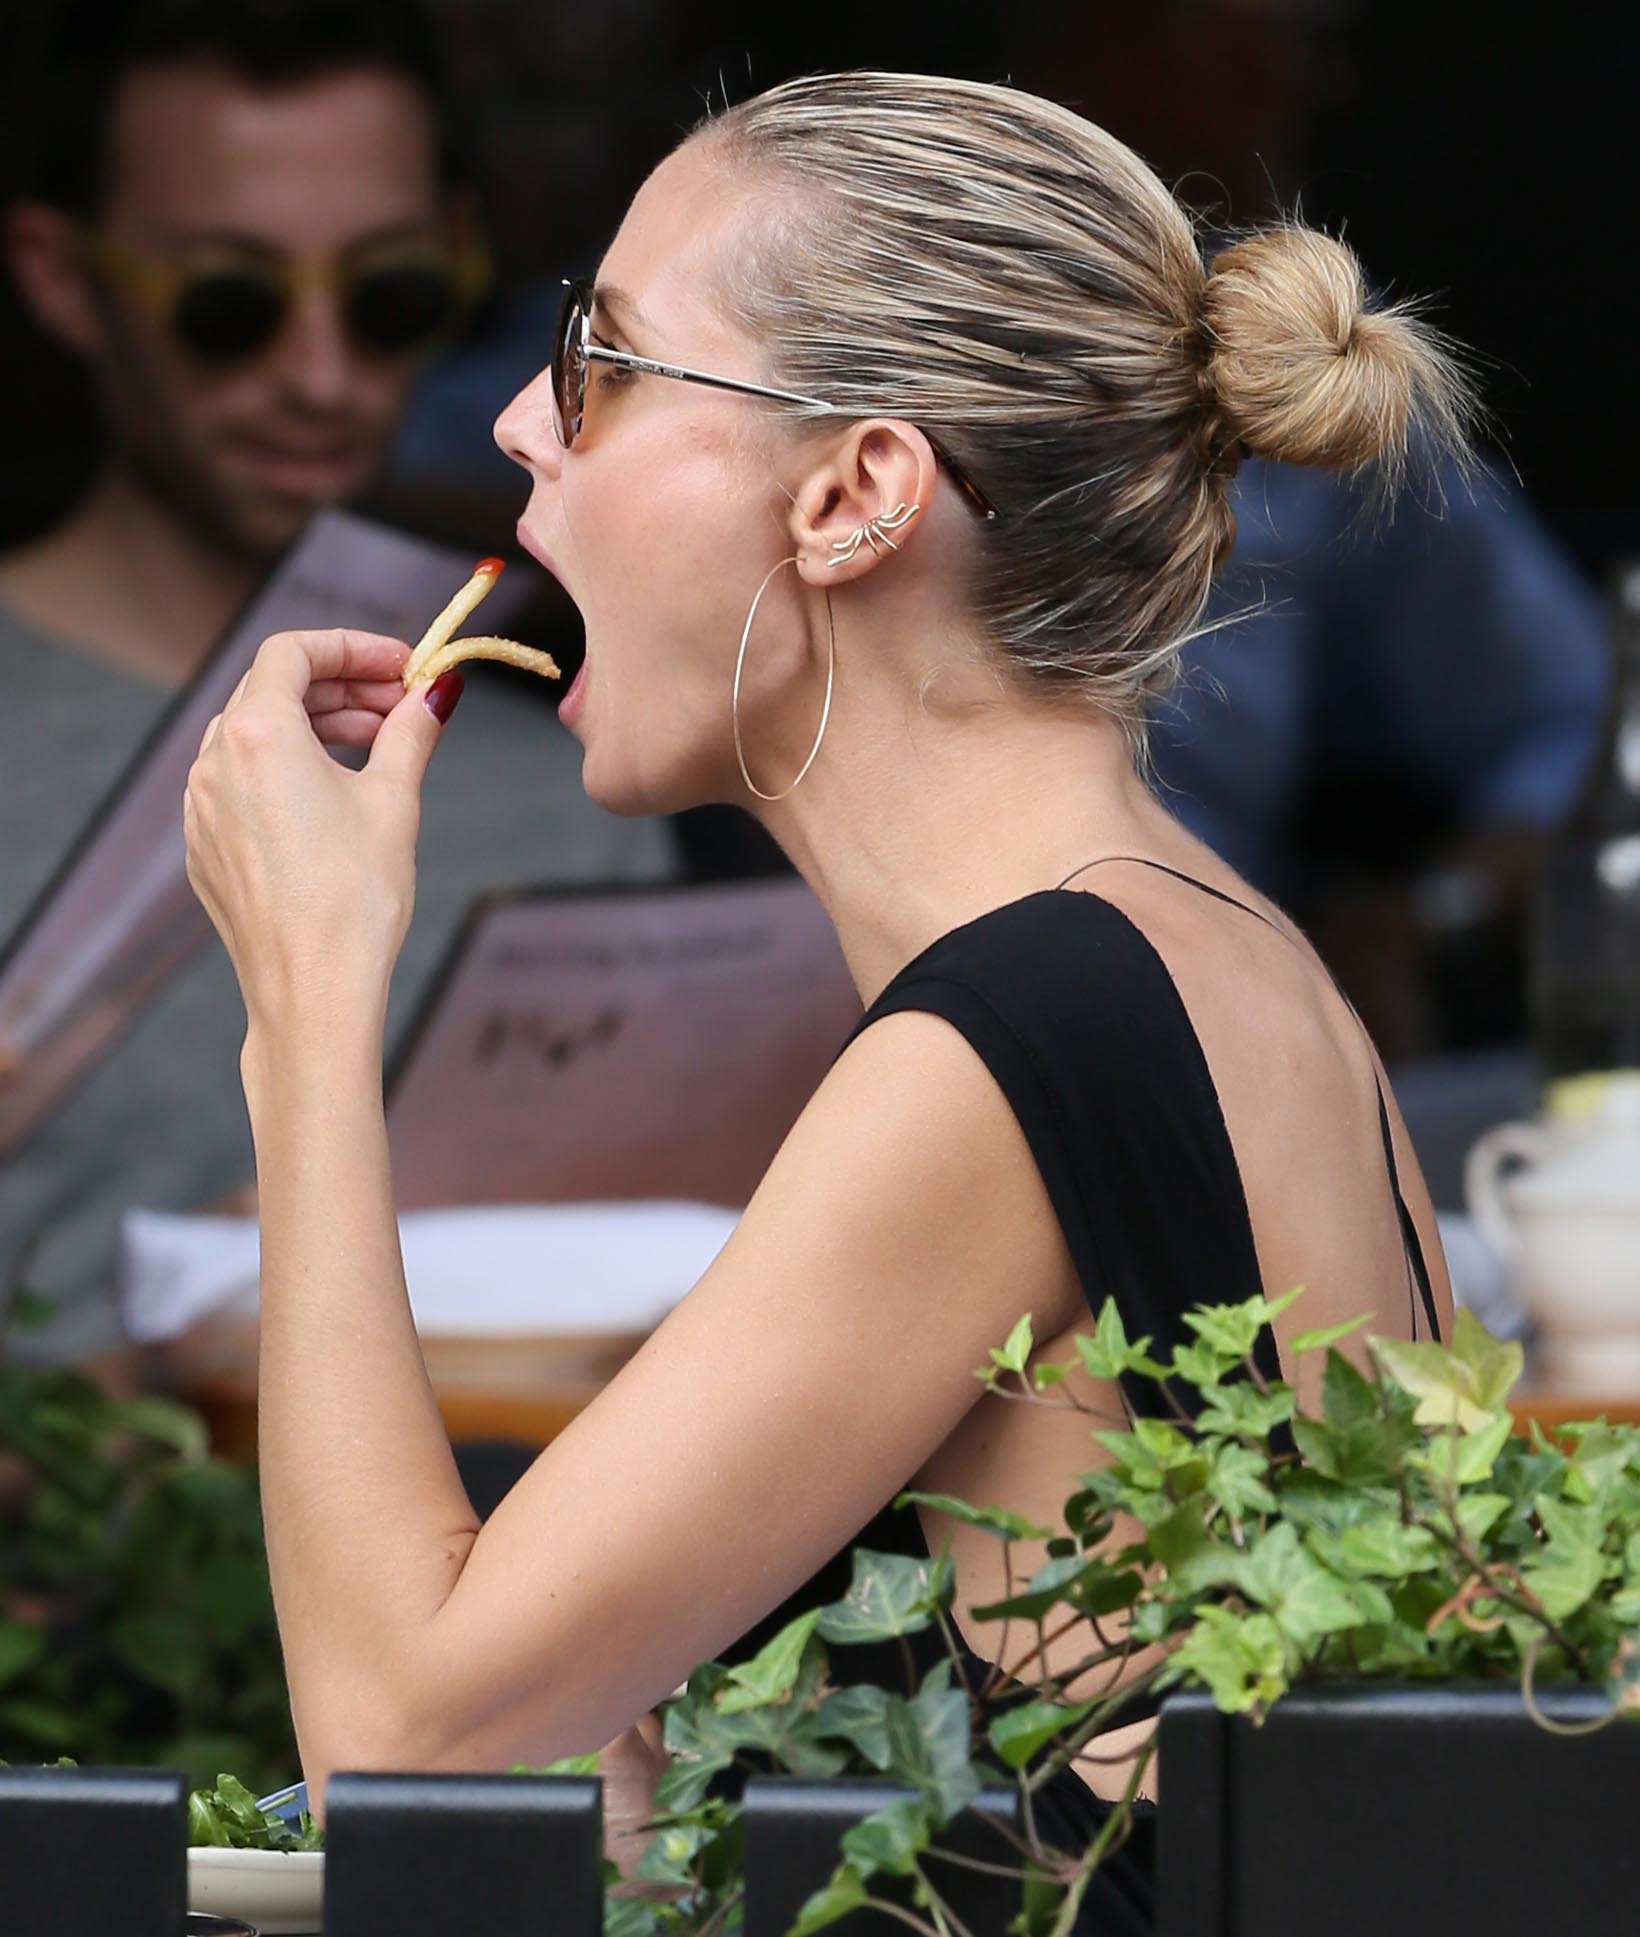 famous people eating bananas